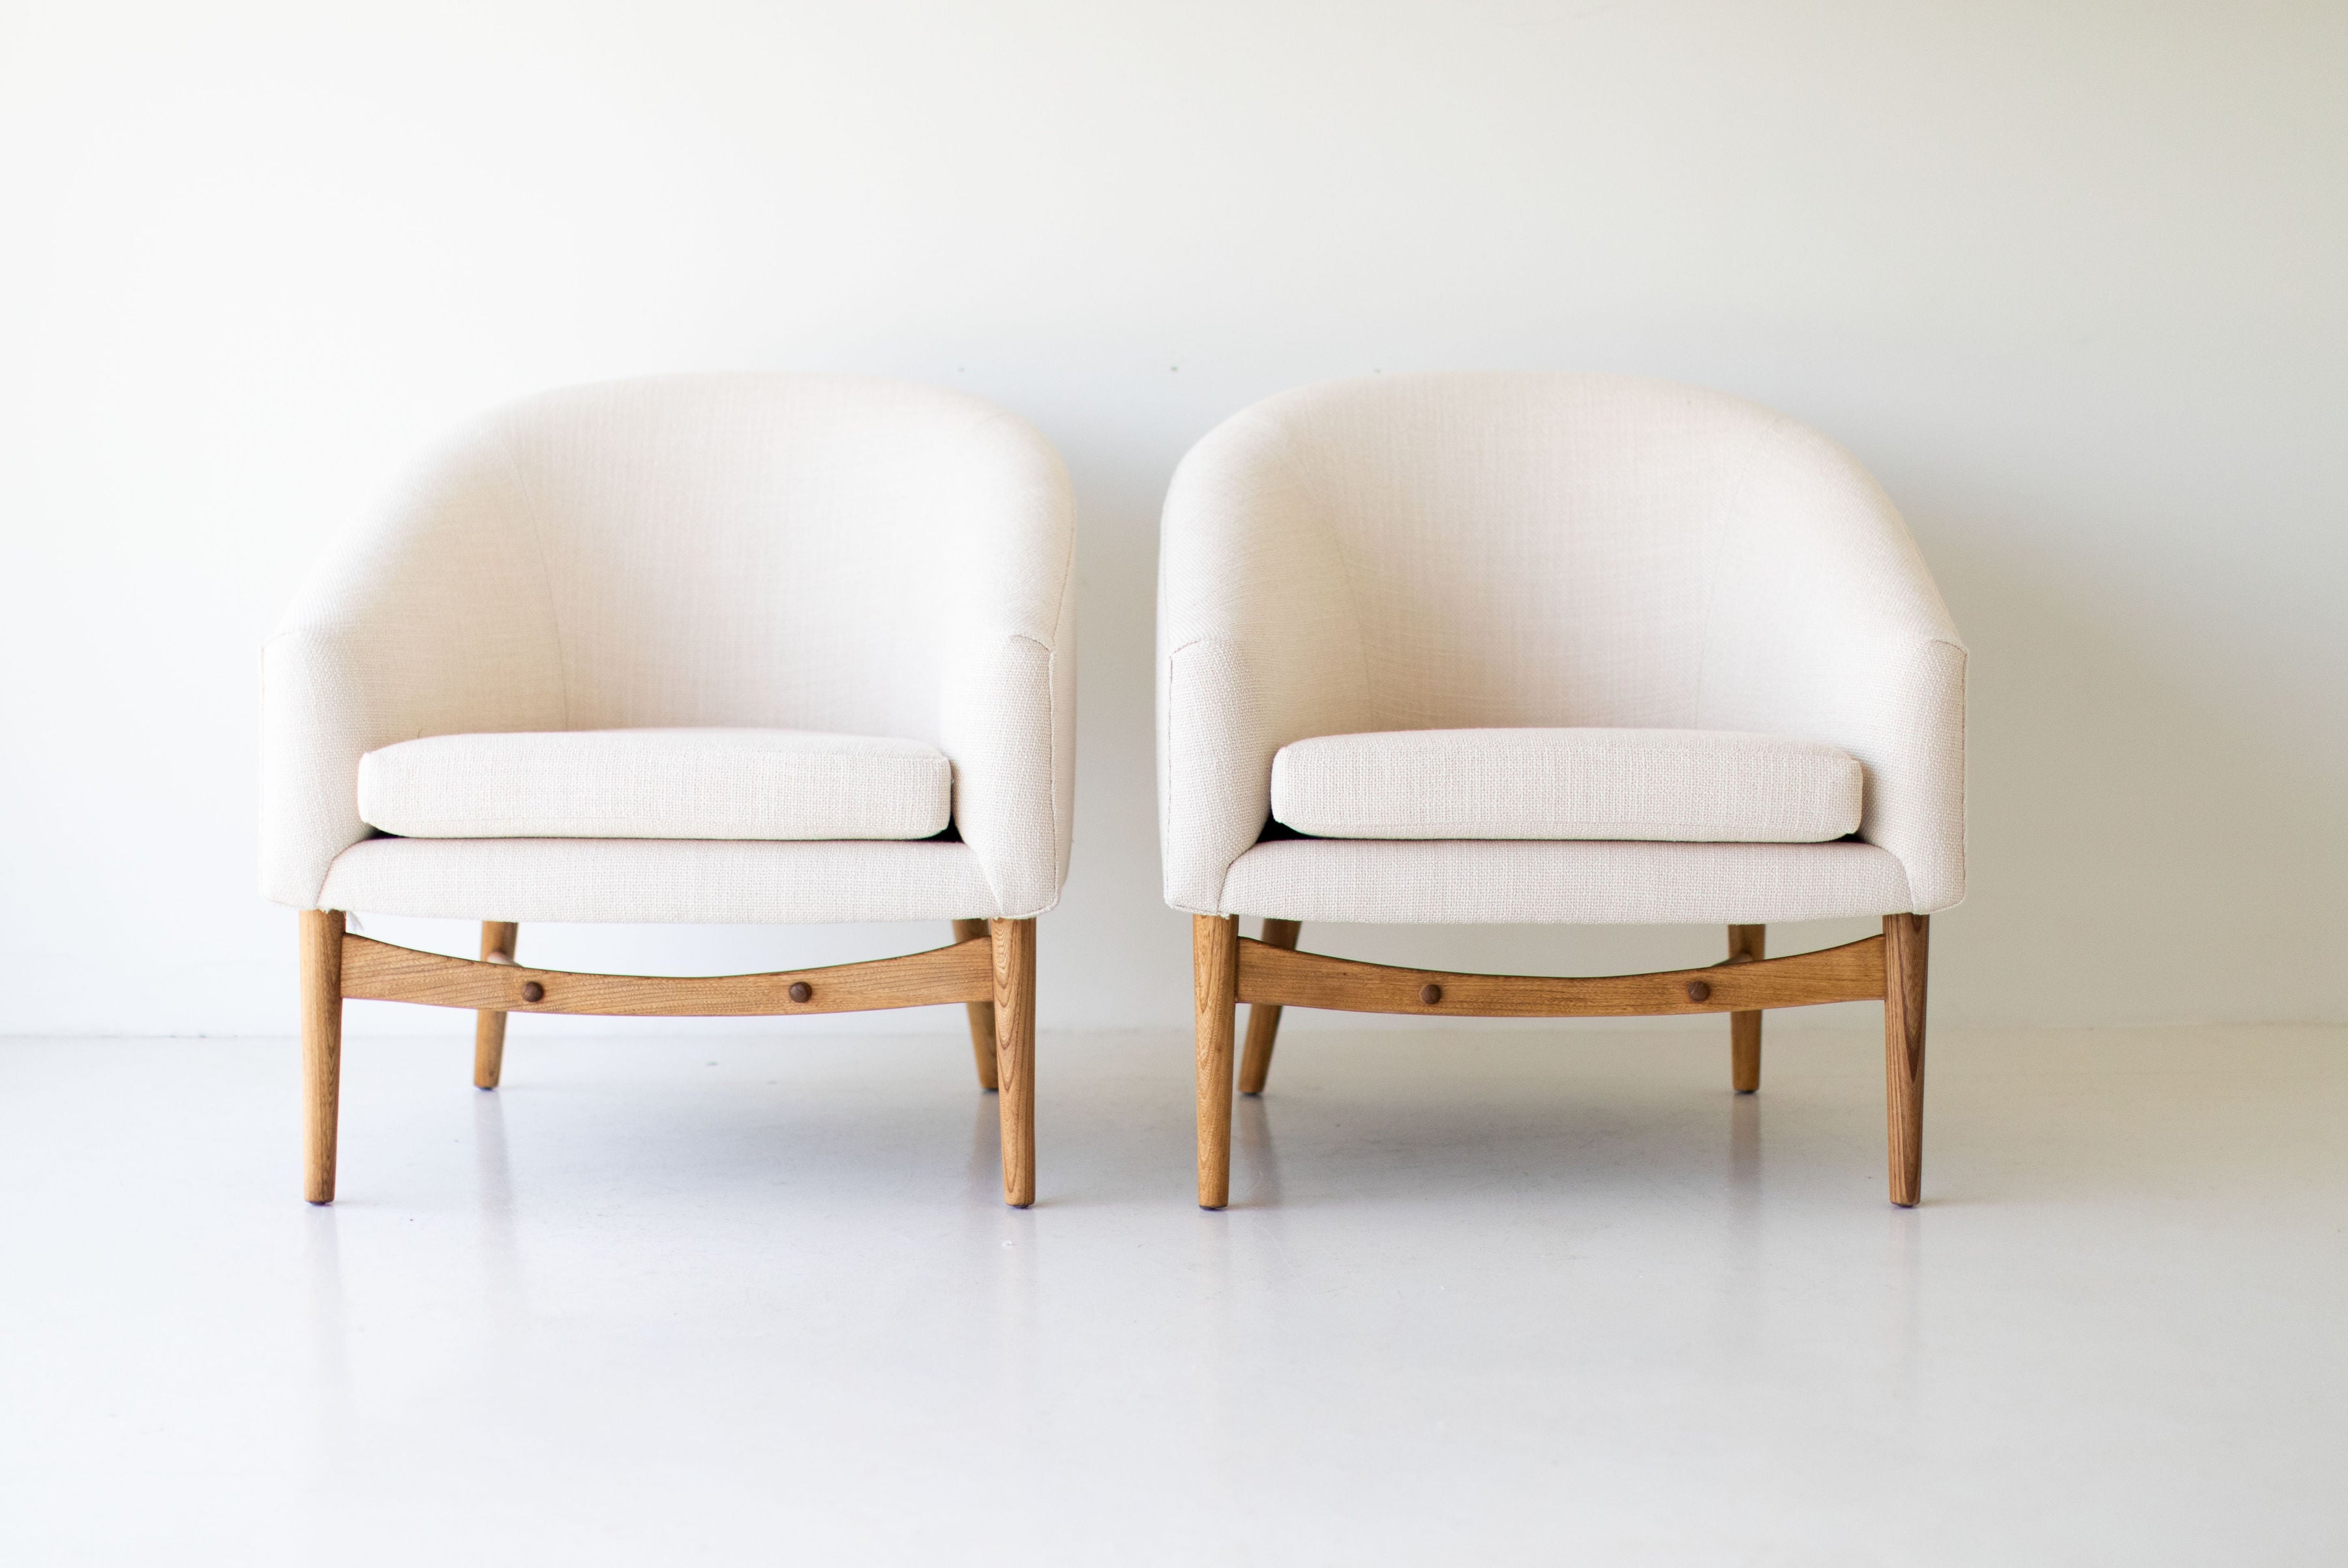 Lawrence Peabody Lounge Chairs for Nemschoff